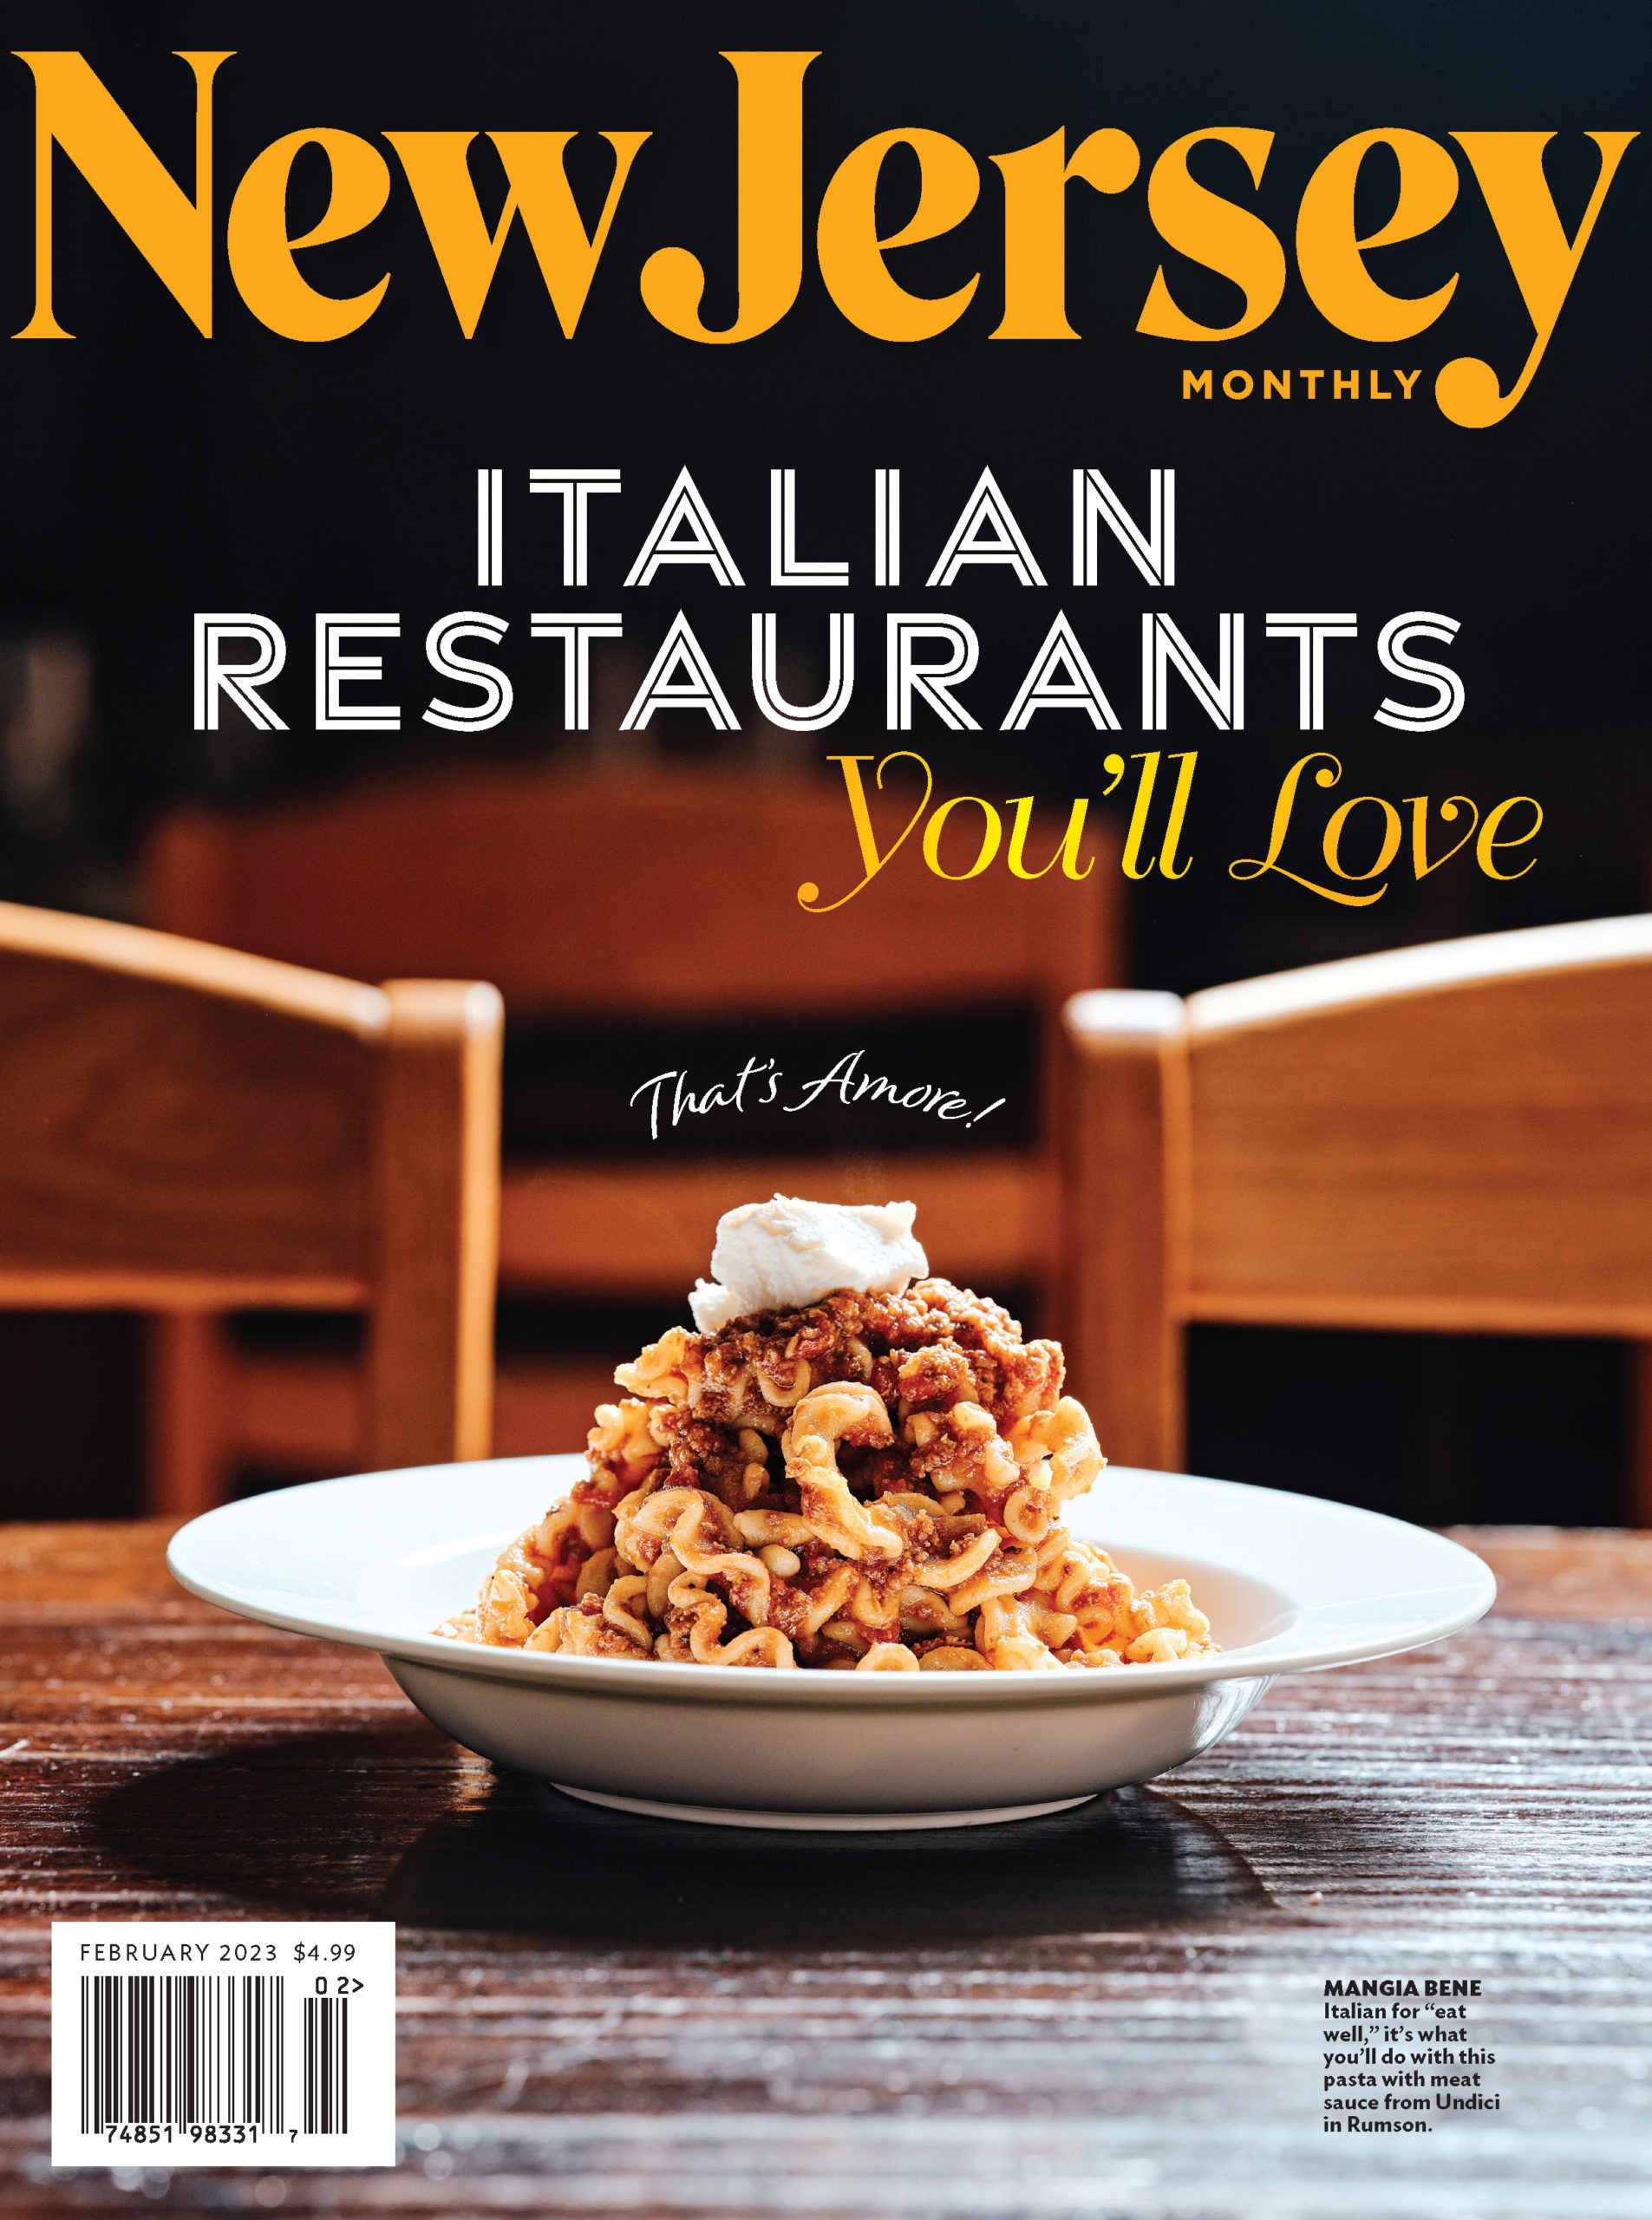 Best Italian Restaurant in New Jersey is Among Best in the Nation